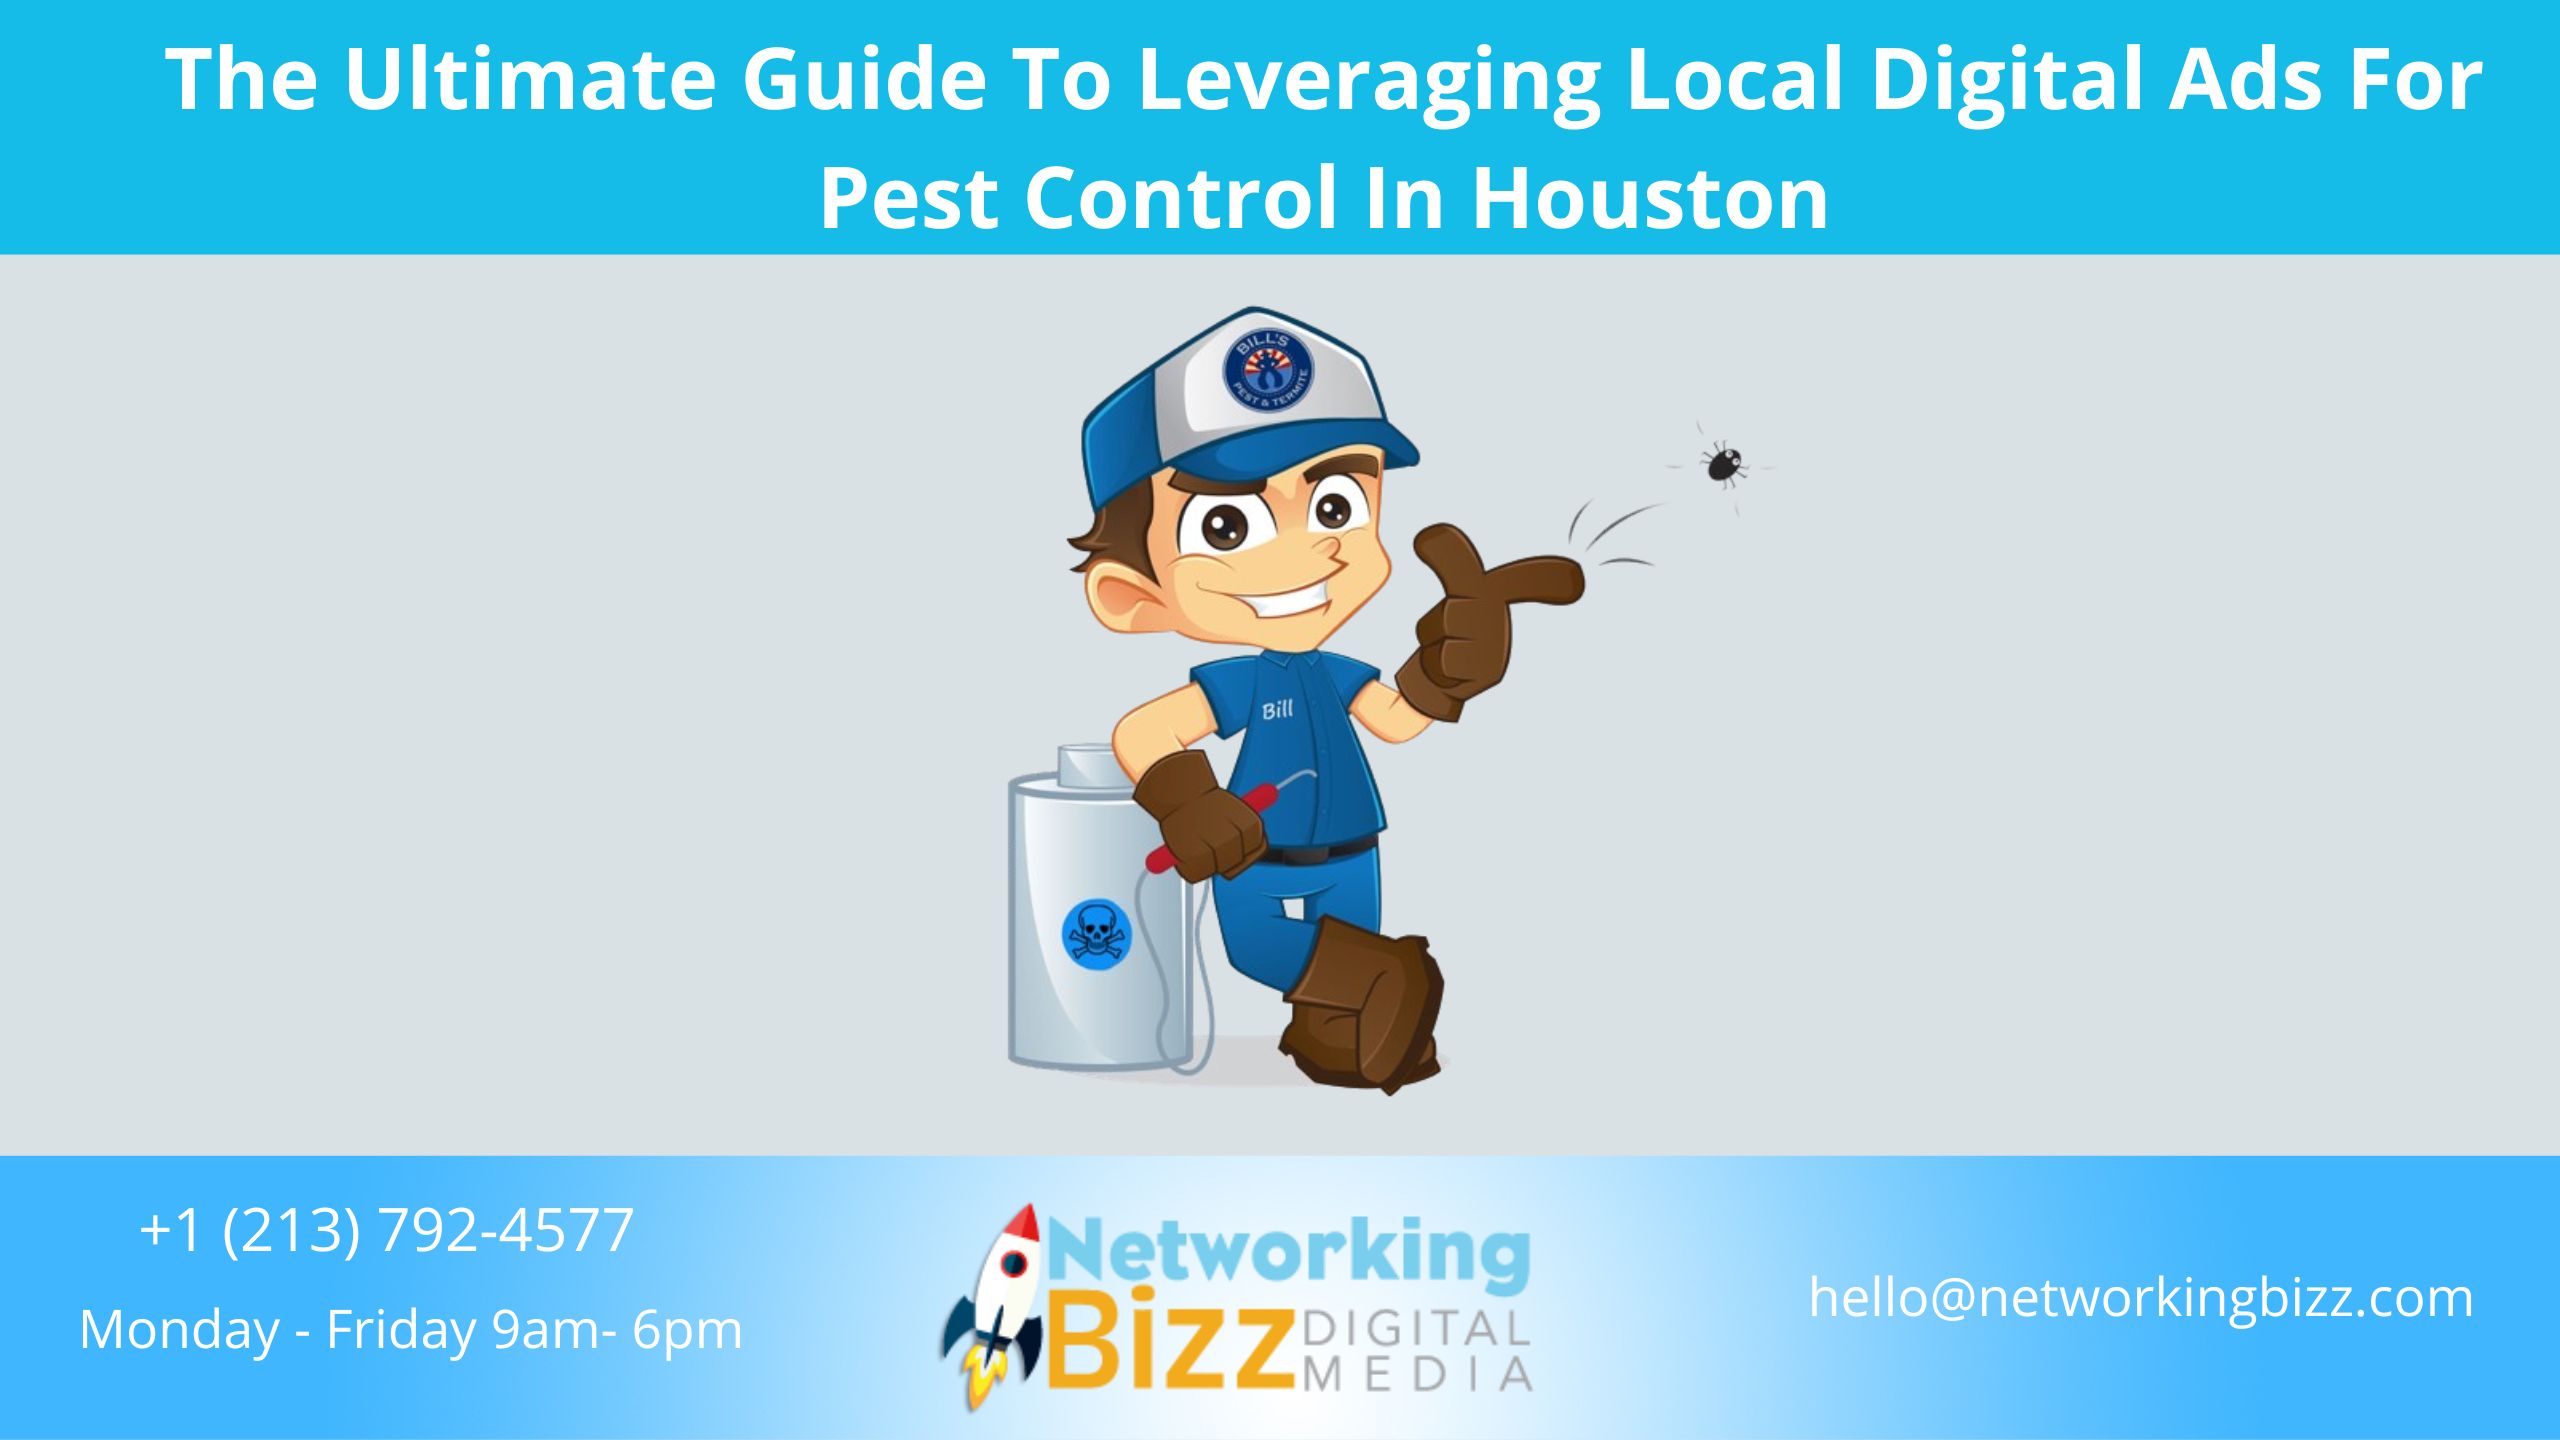 The Ultimate Guide To Leveraging Local Digital Ads For Pest Control In Houston